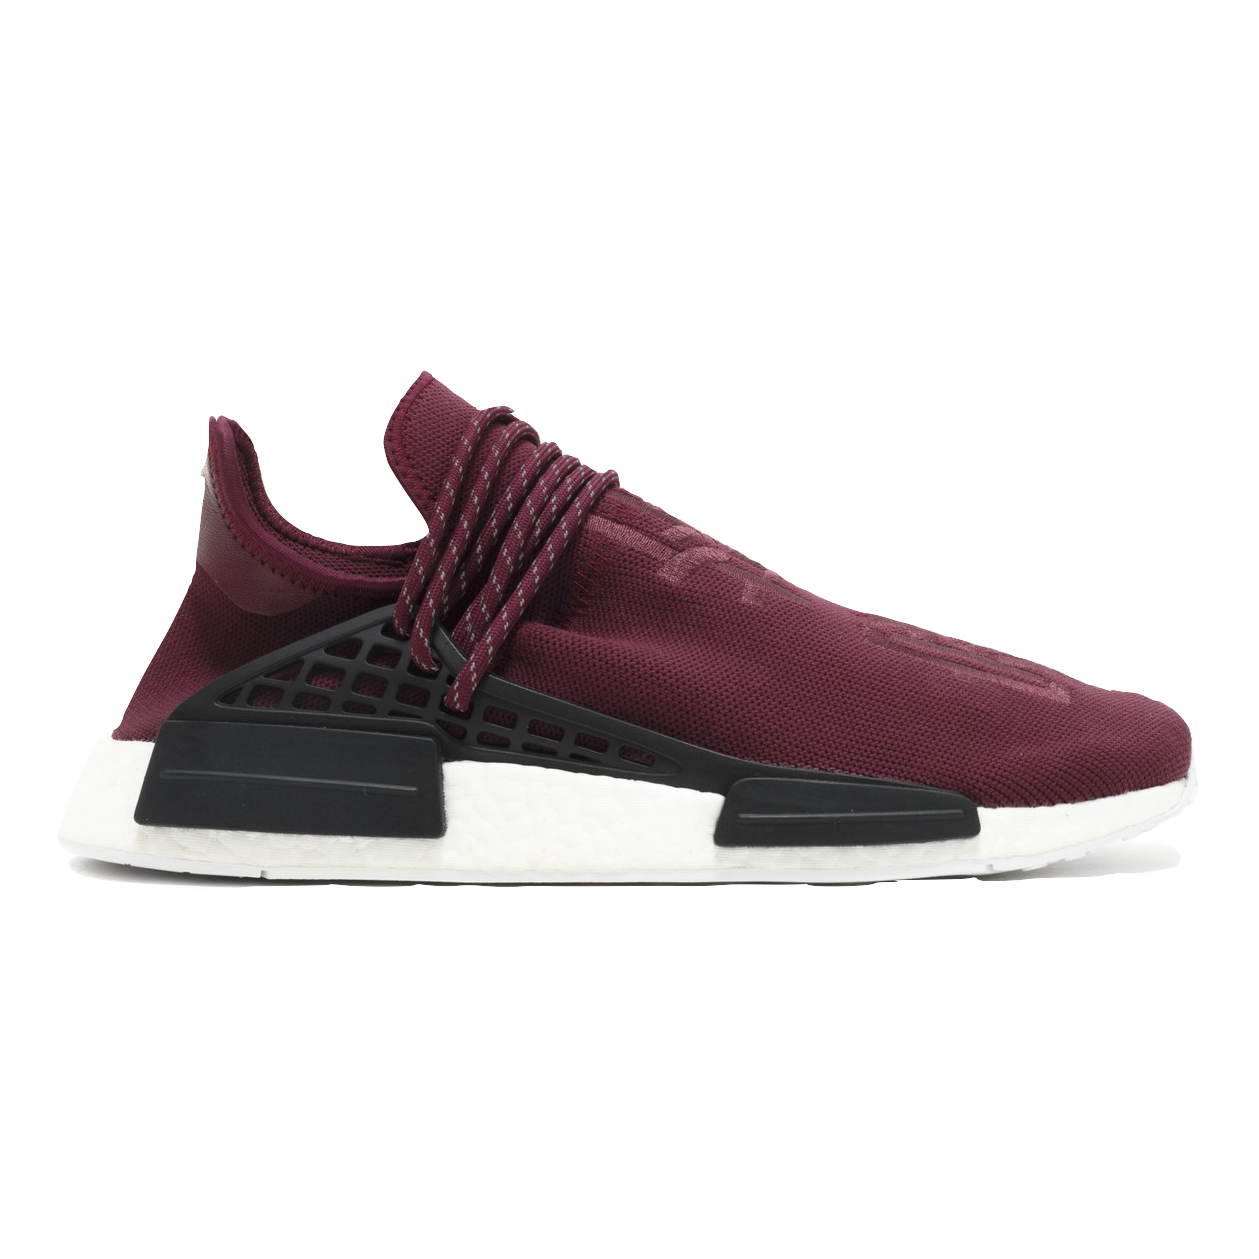 PW Human Race NMD - Friends And Family